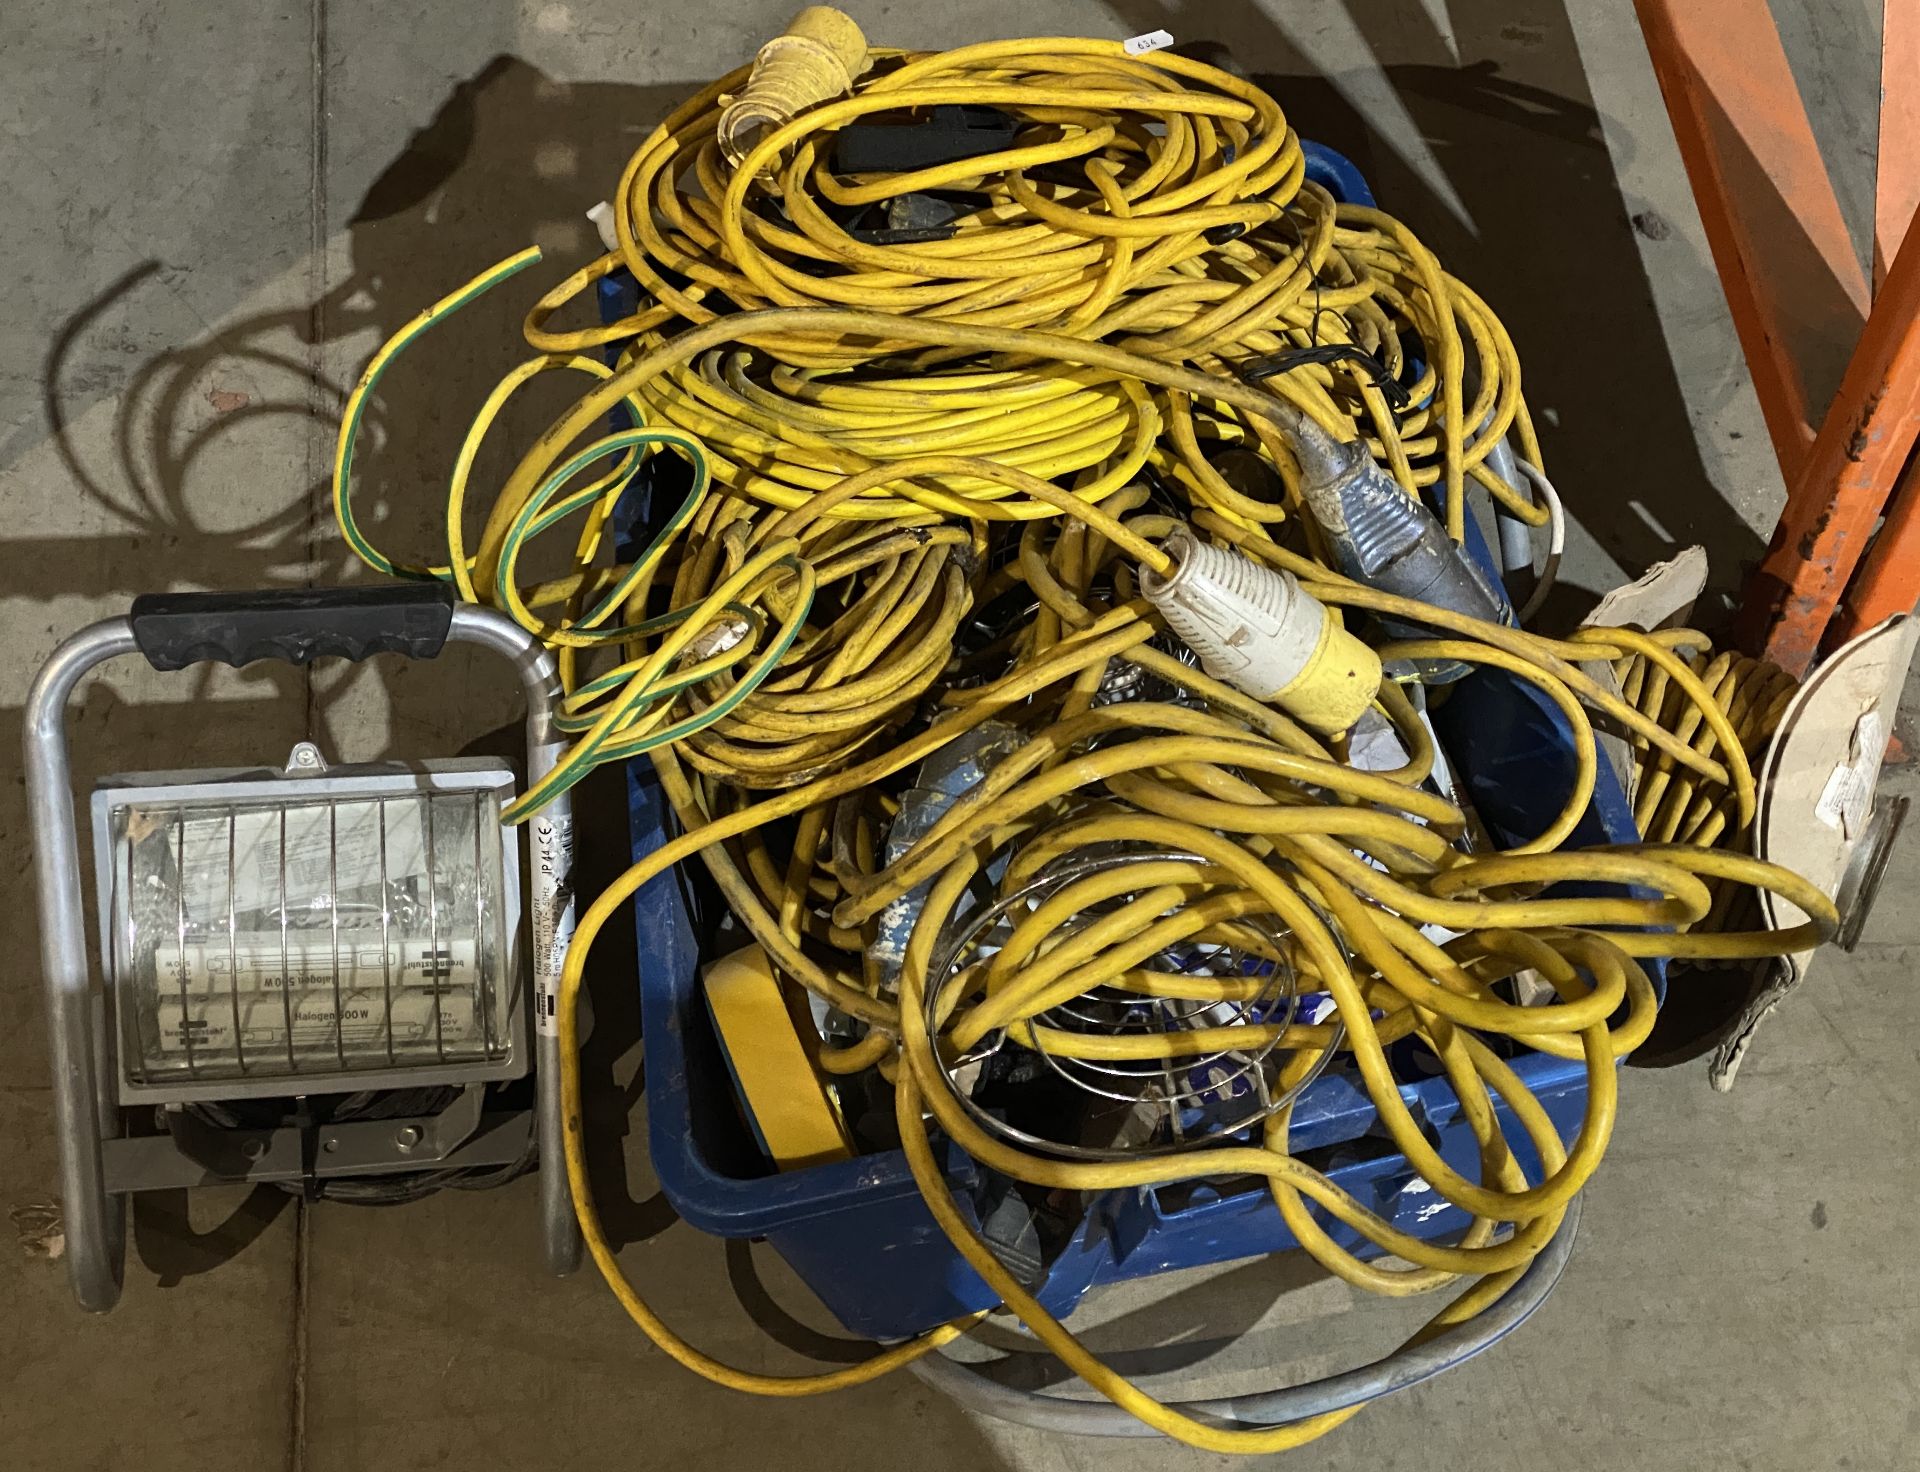 Contents to box - large quantity of 110v cable connections and wiring,